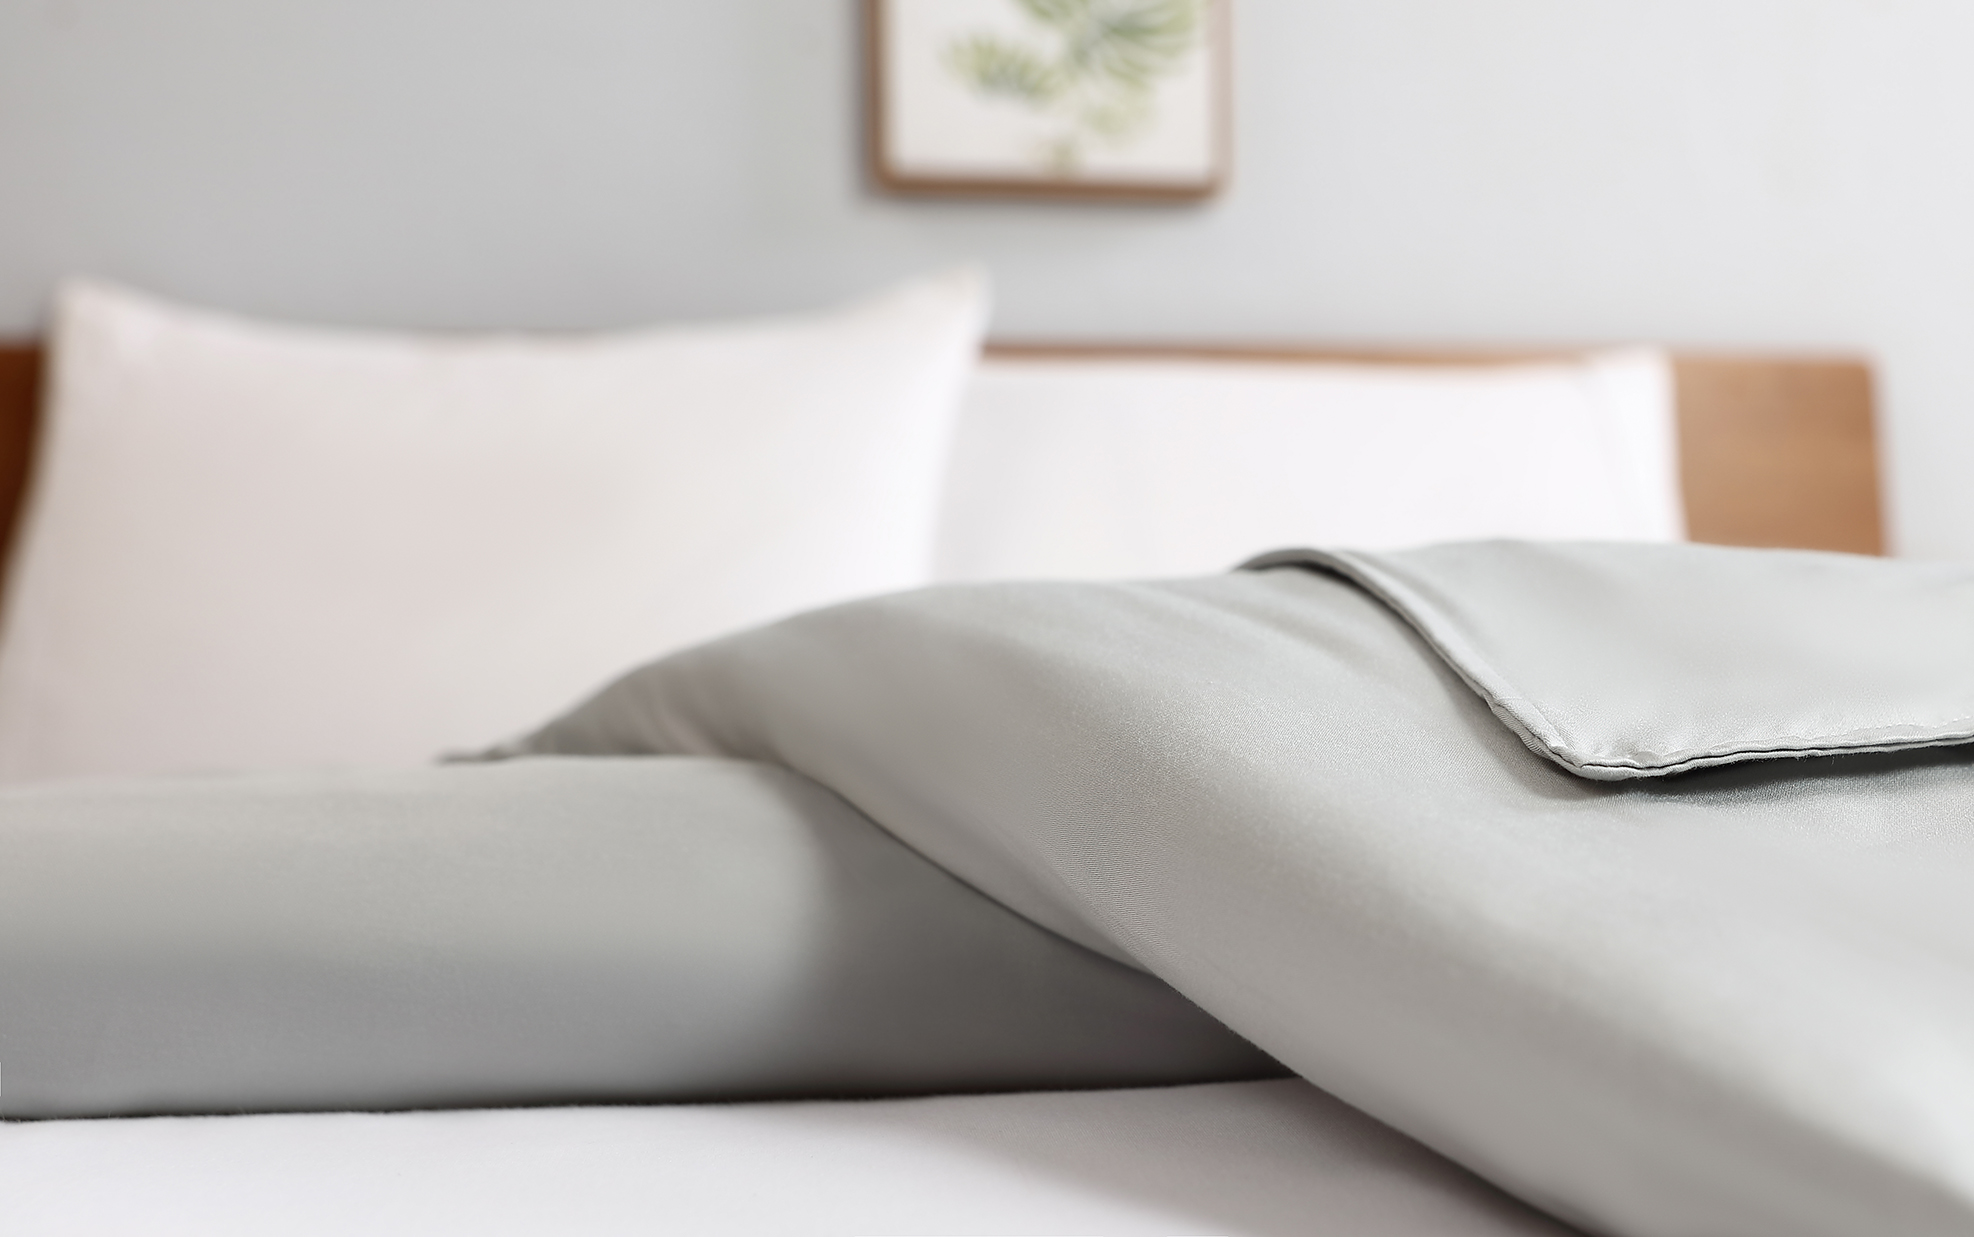 Bamboo Bedding: Sunday Citizen creates the most comfortable and softest Bamboo Blankets and Sheets for your comfort.